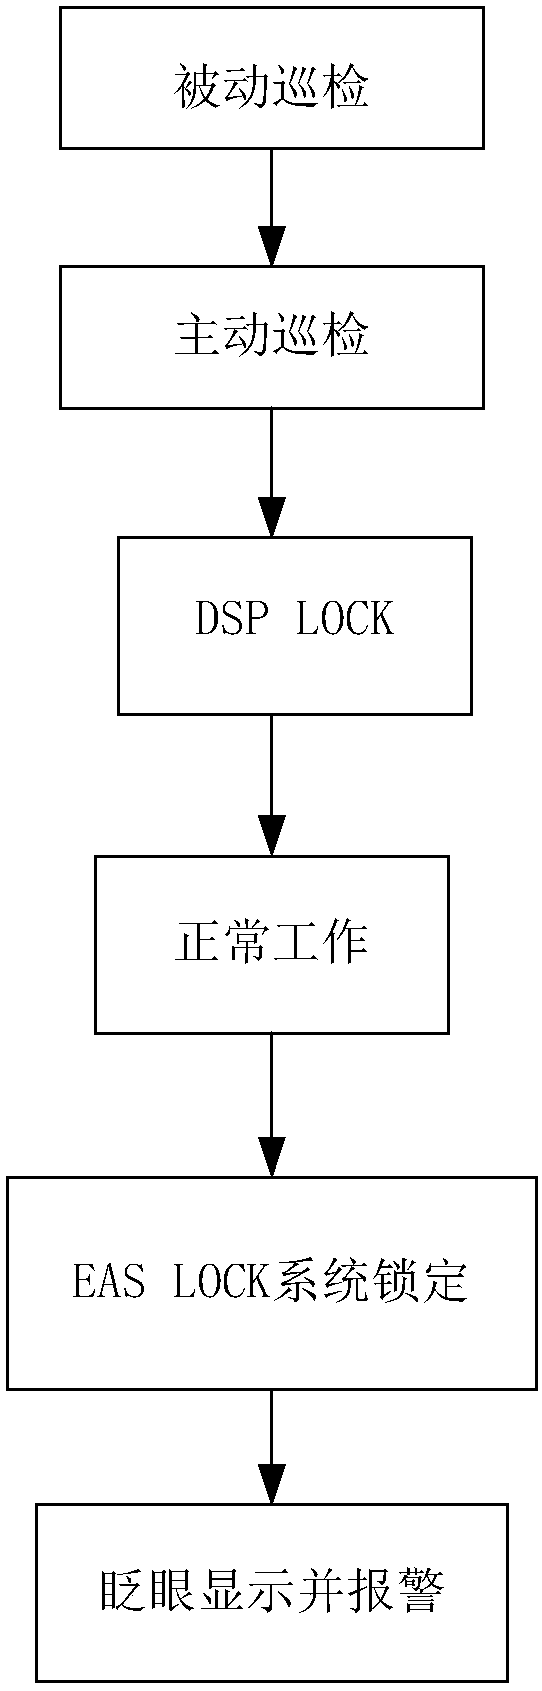 Detection method of electronic article surveillance equipment